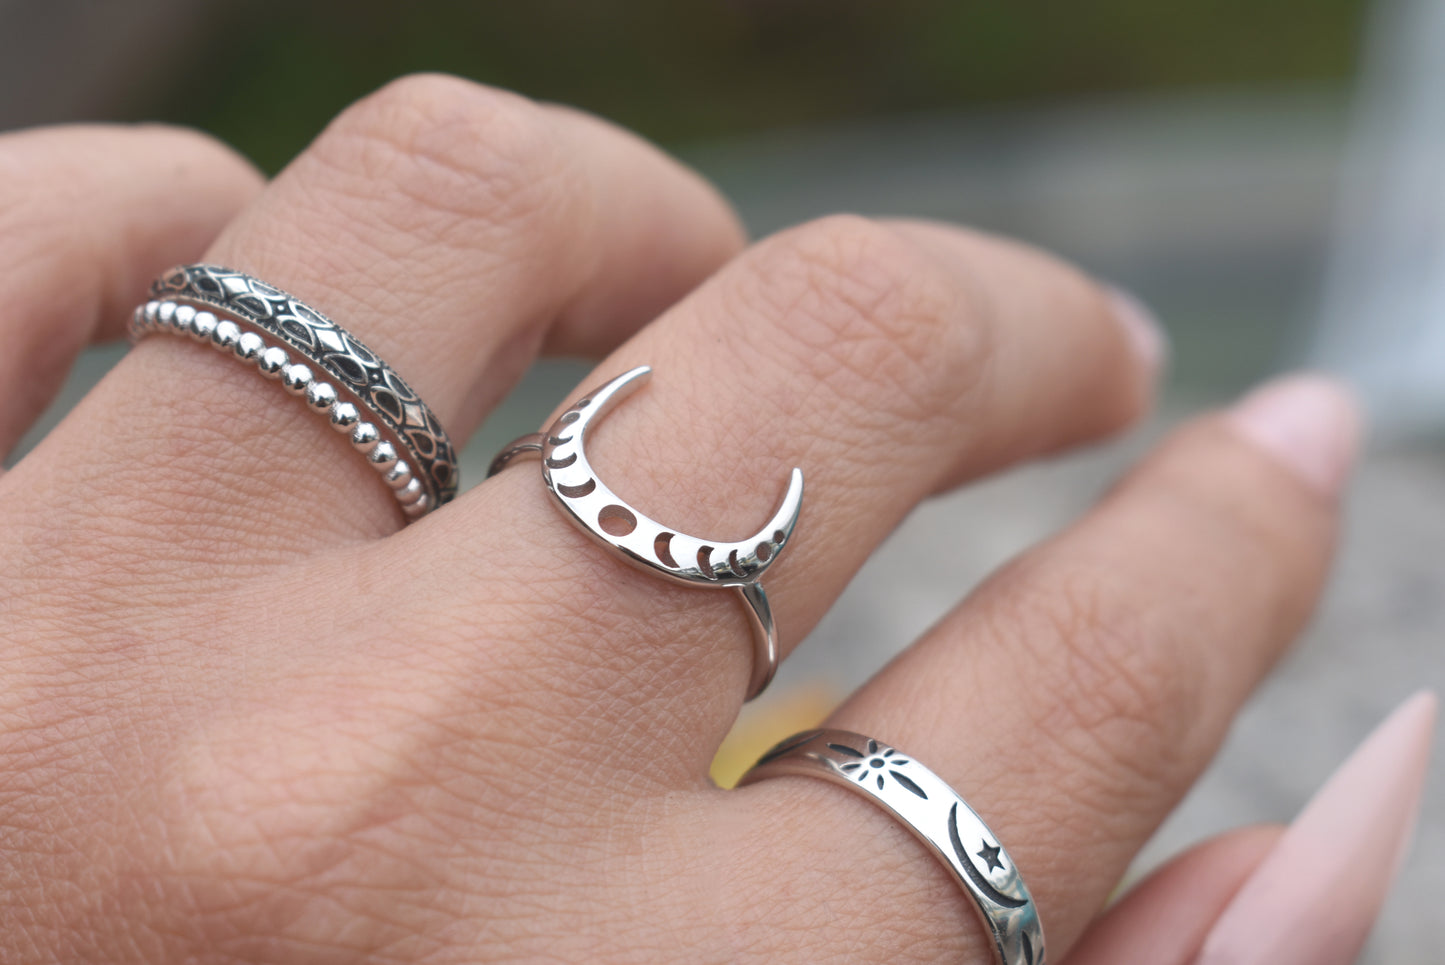 Moon Phase Ring-Crescent Moon Ring, Silver Moon Ring, Luna Ring-Sterling Silver Ring